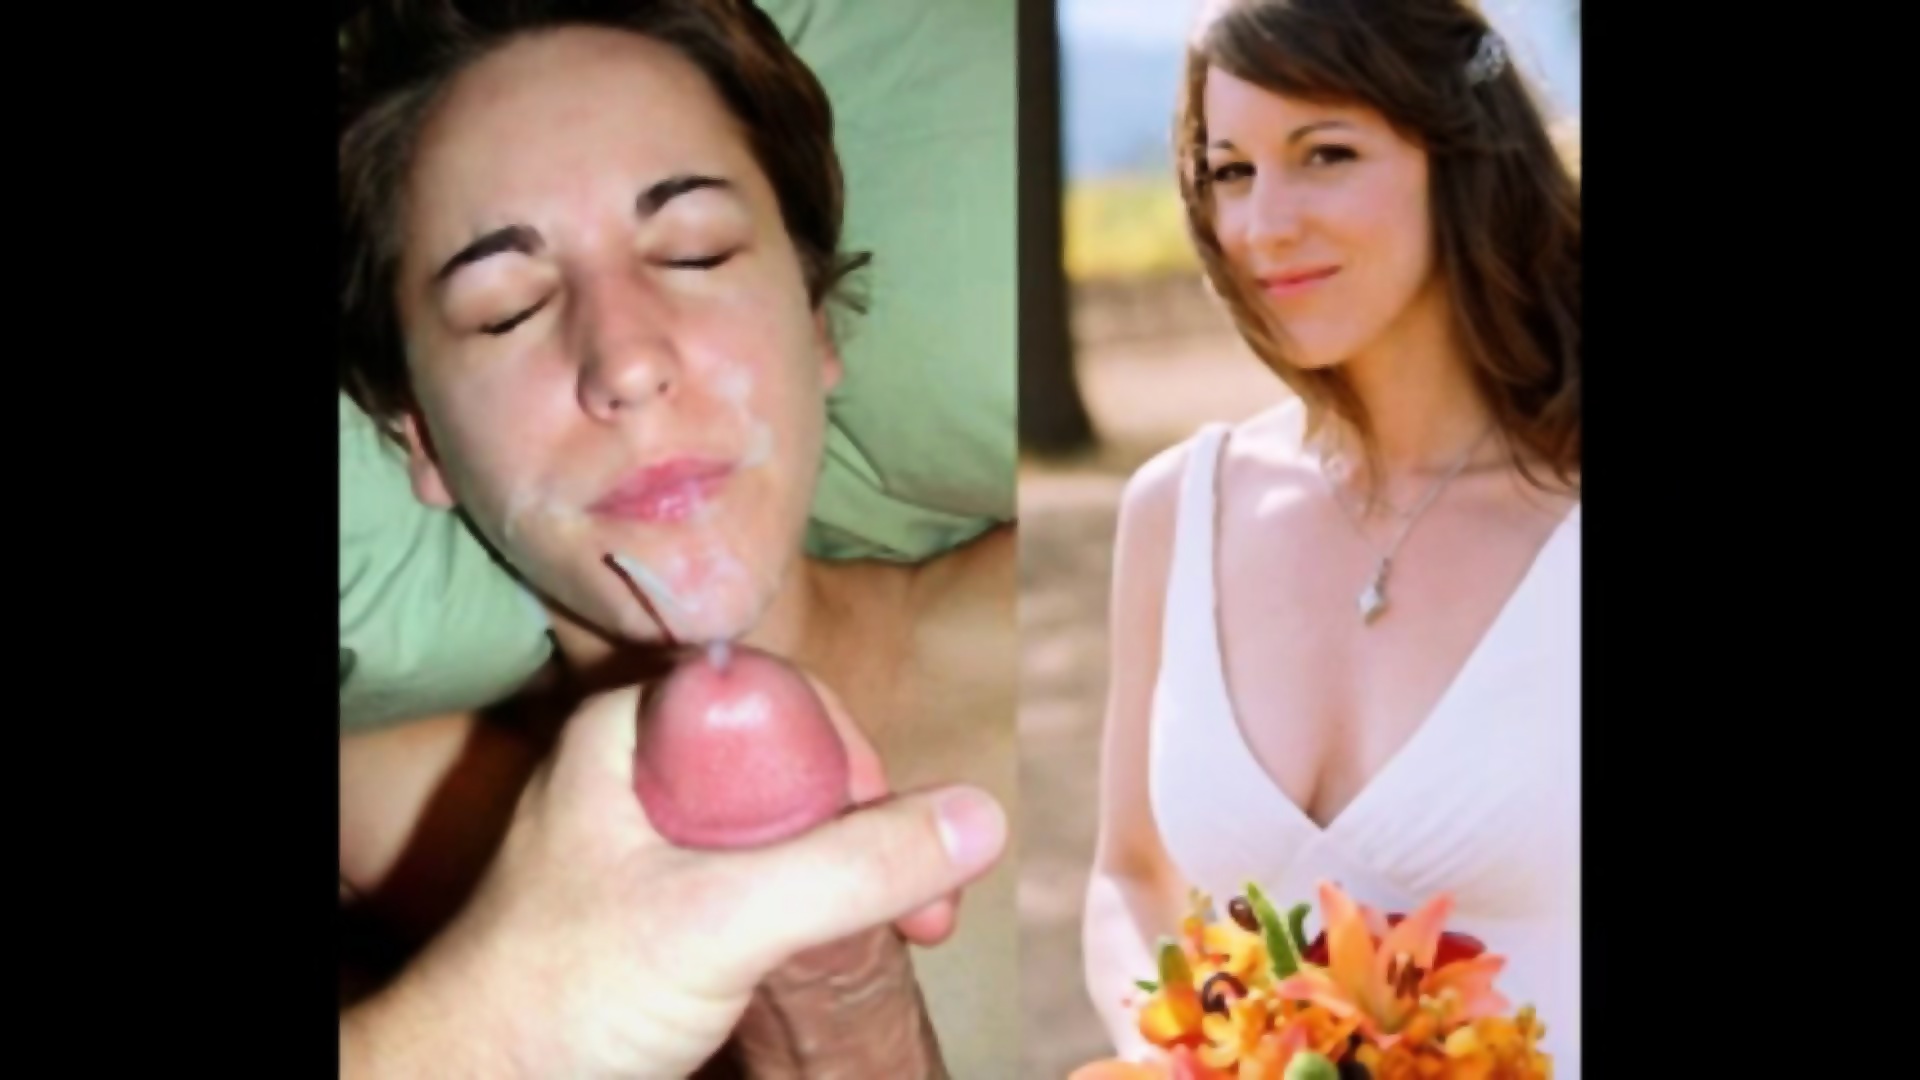 Brides Dressed, Undressed And Fucked Compilation image